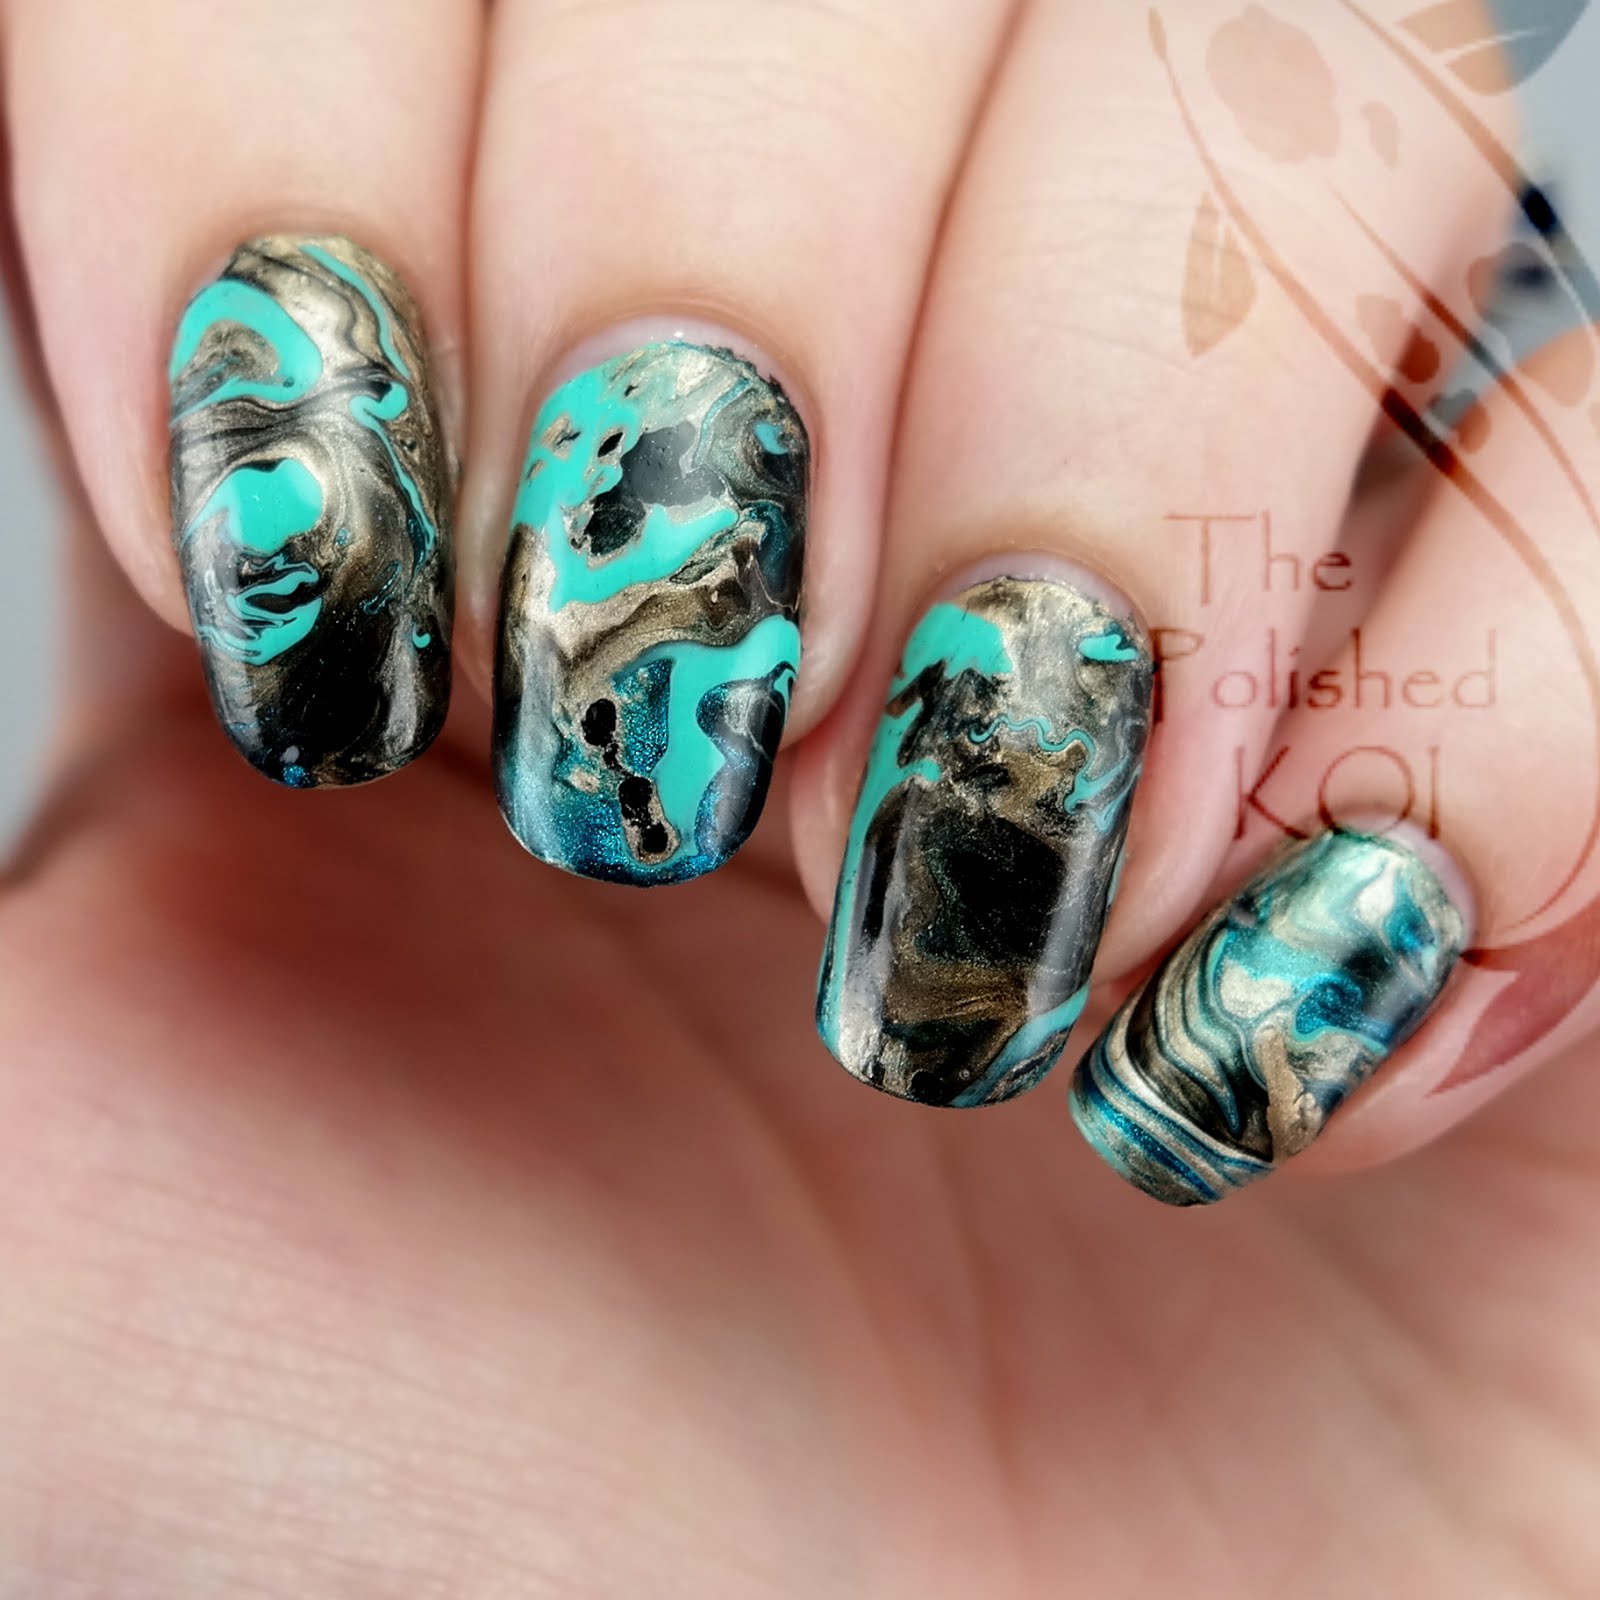 The Polished KOI: Drip Marble - no water needed!